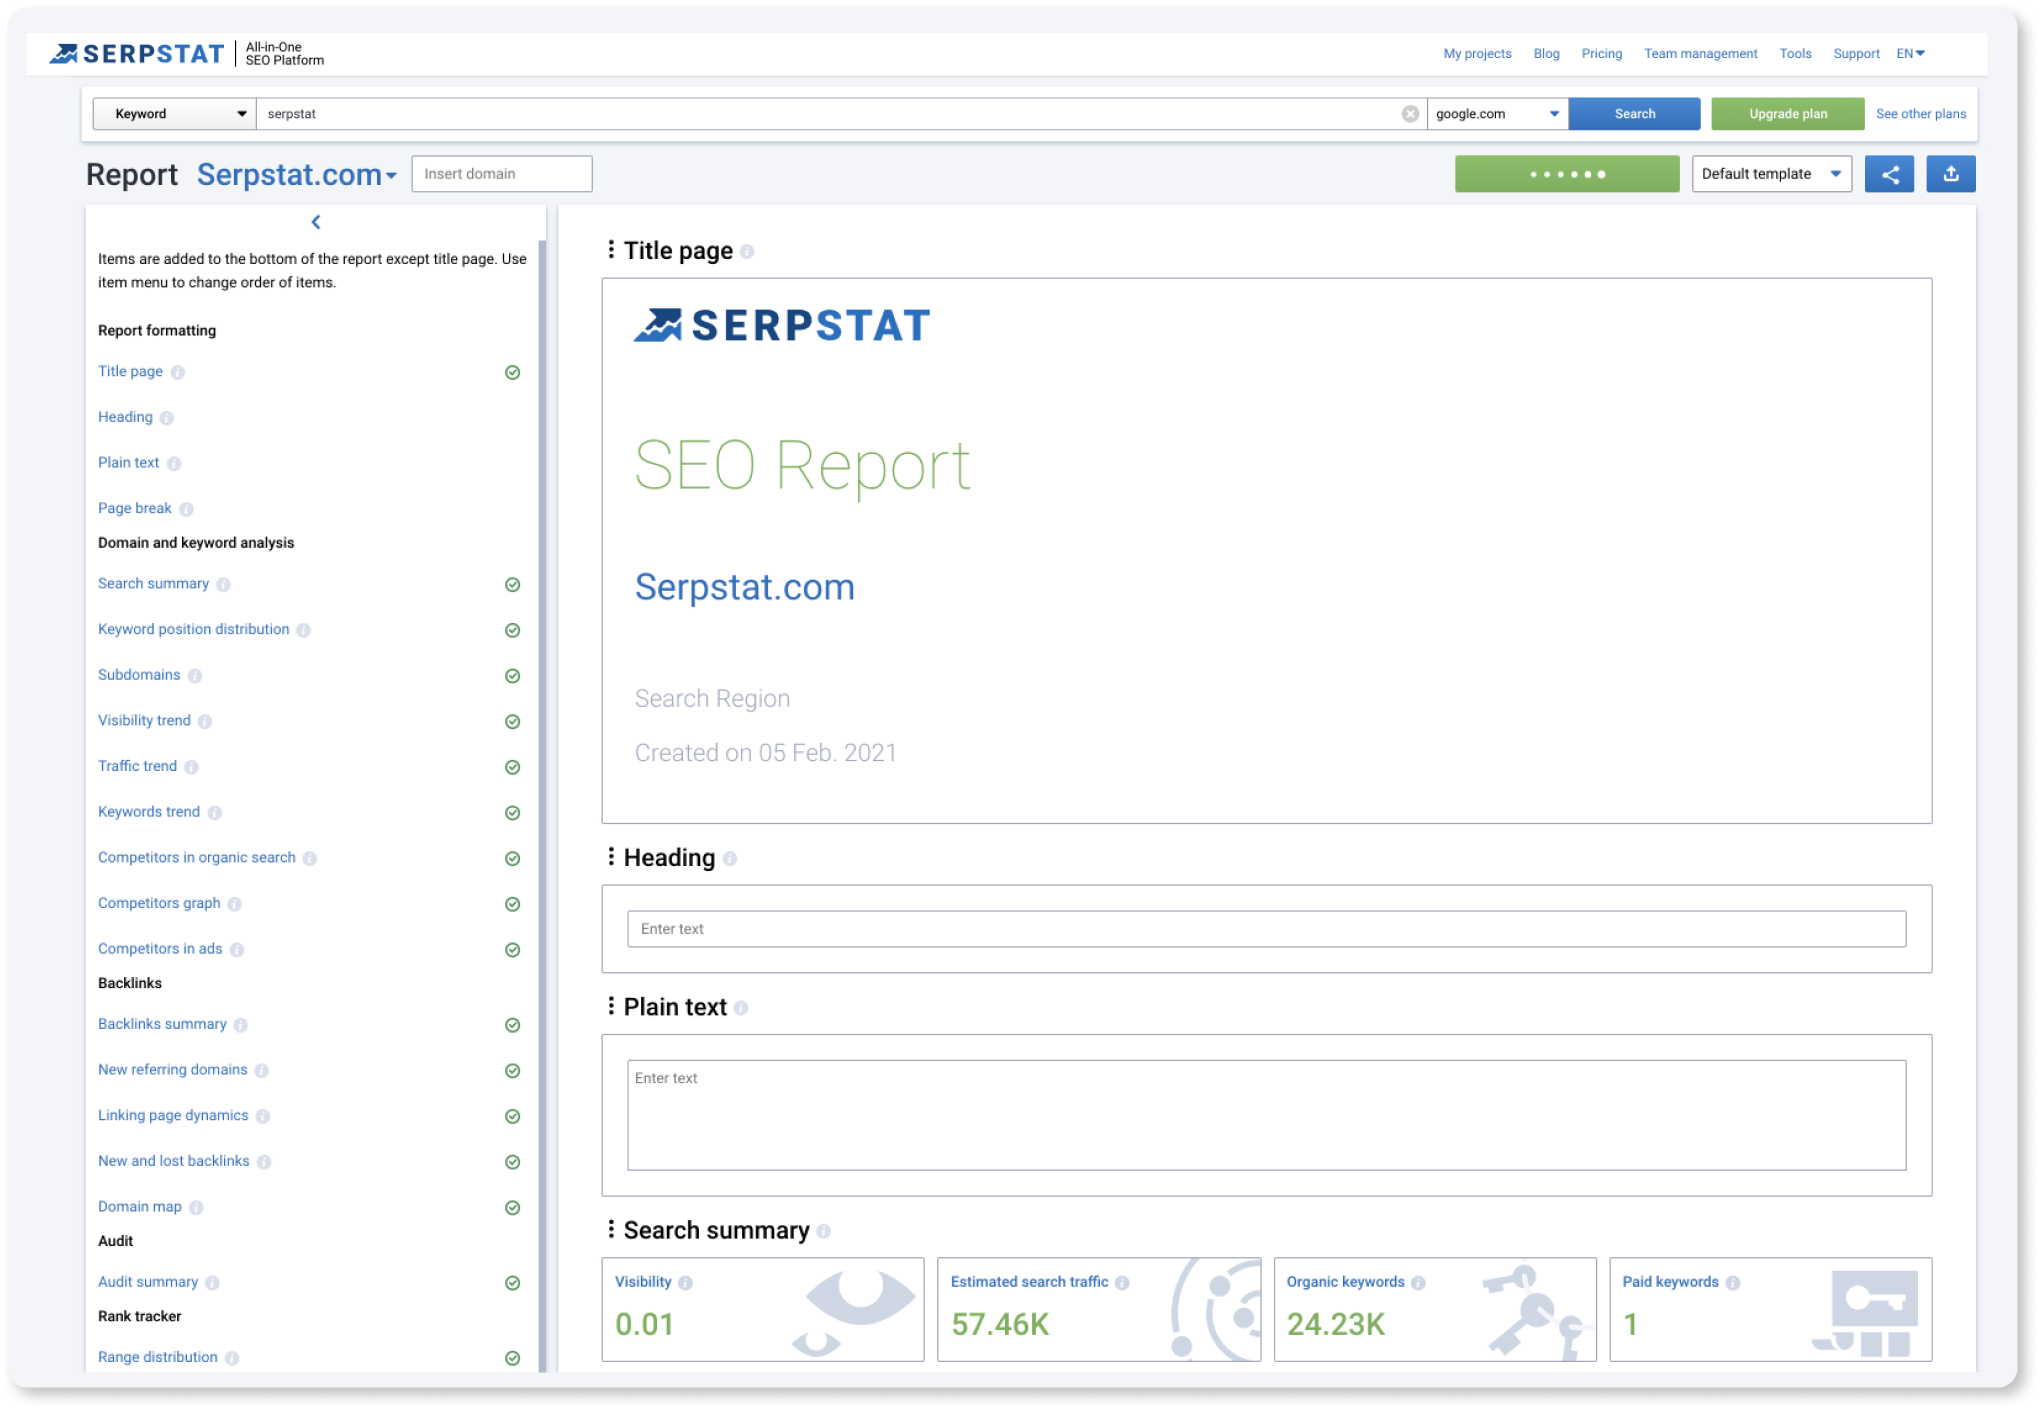 Request Your Personal Demo To Discover More Tools Of Serpstat 16261788533266